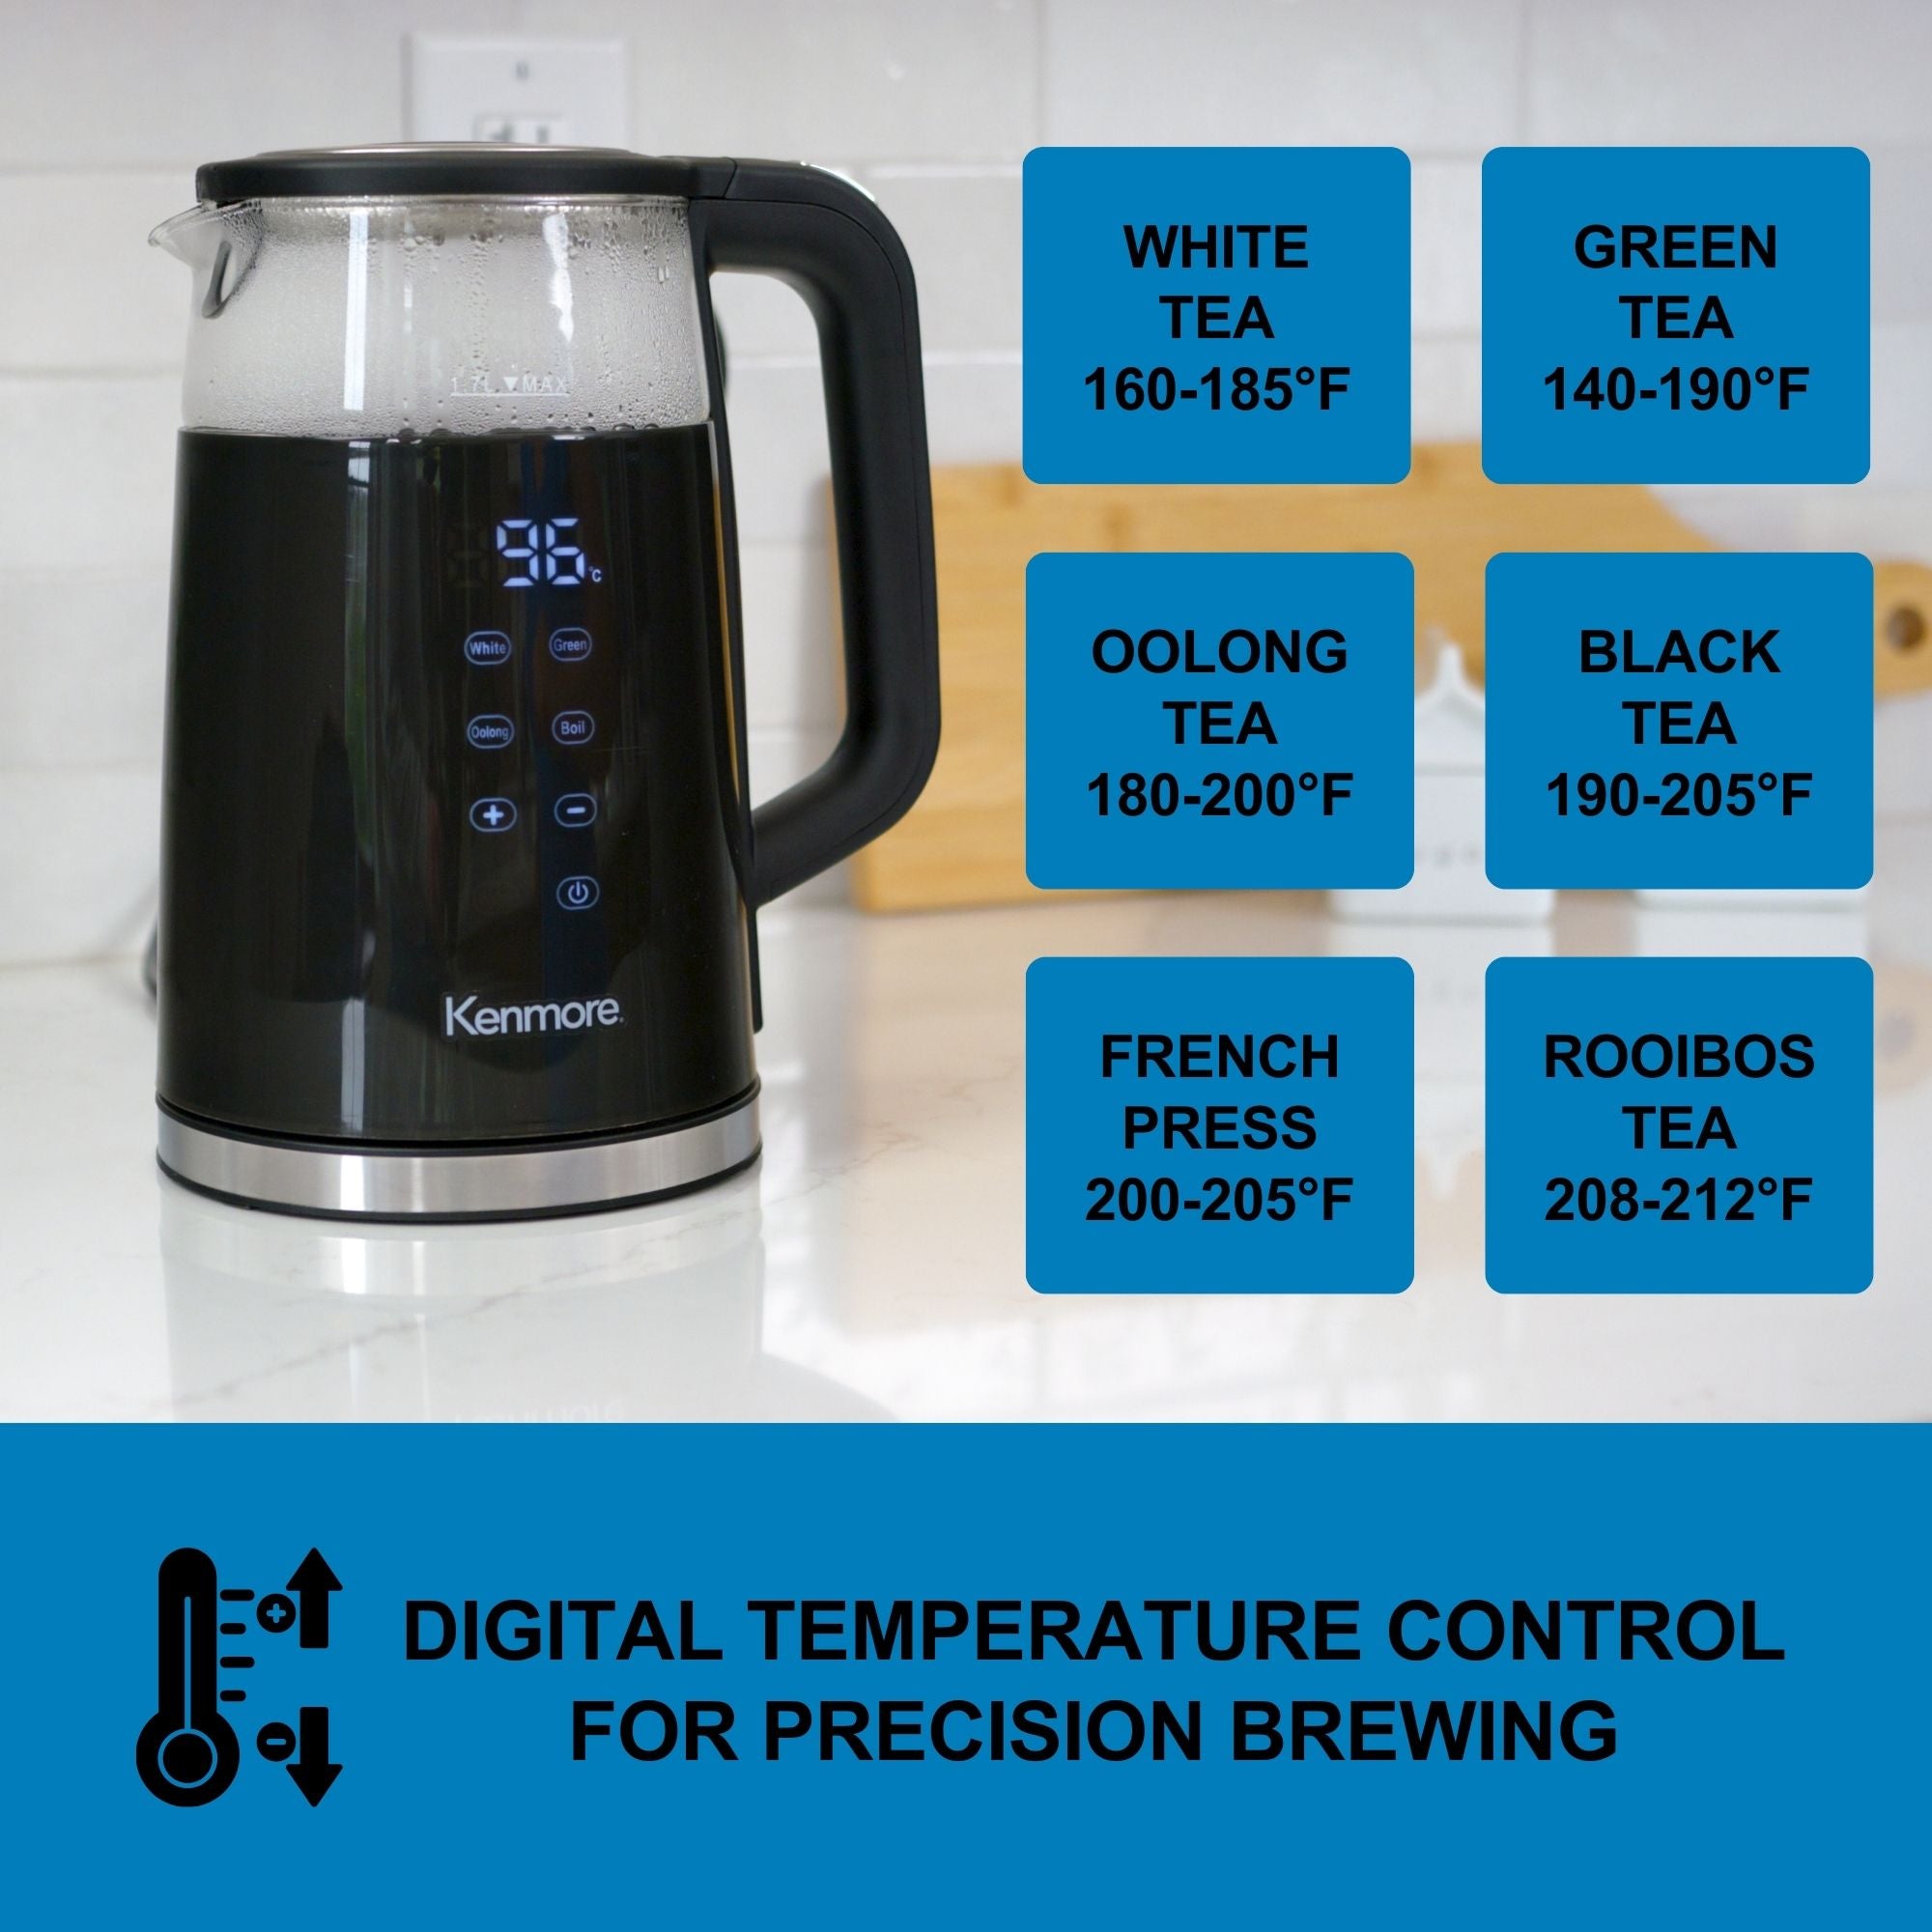 Kenmore digital cordless glass kettle on a white counter. Text below reads, "Digital temperature control for precision brewing" and optimal temperatures for different types of tea and coffee are listed to the right